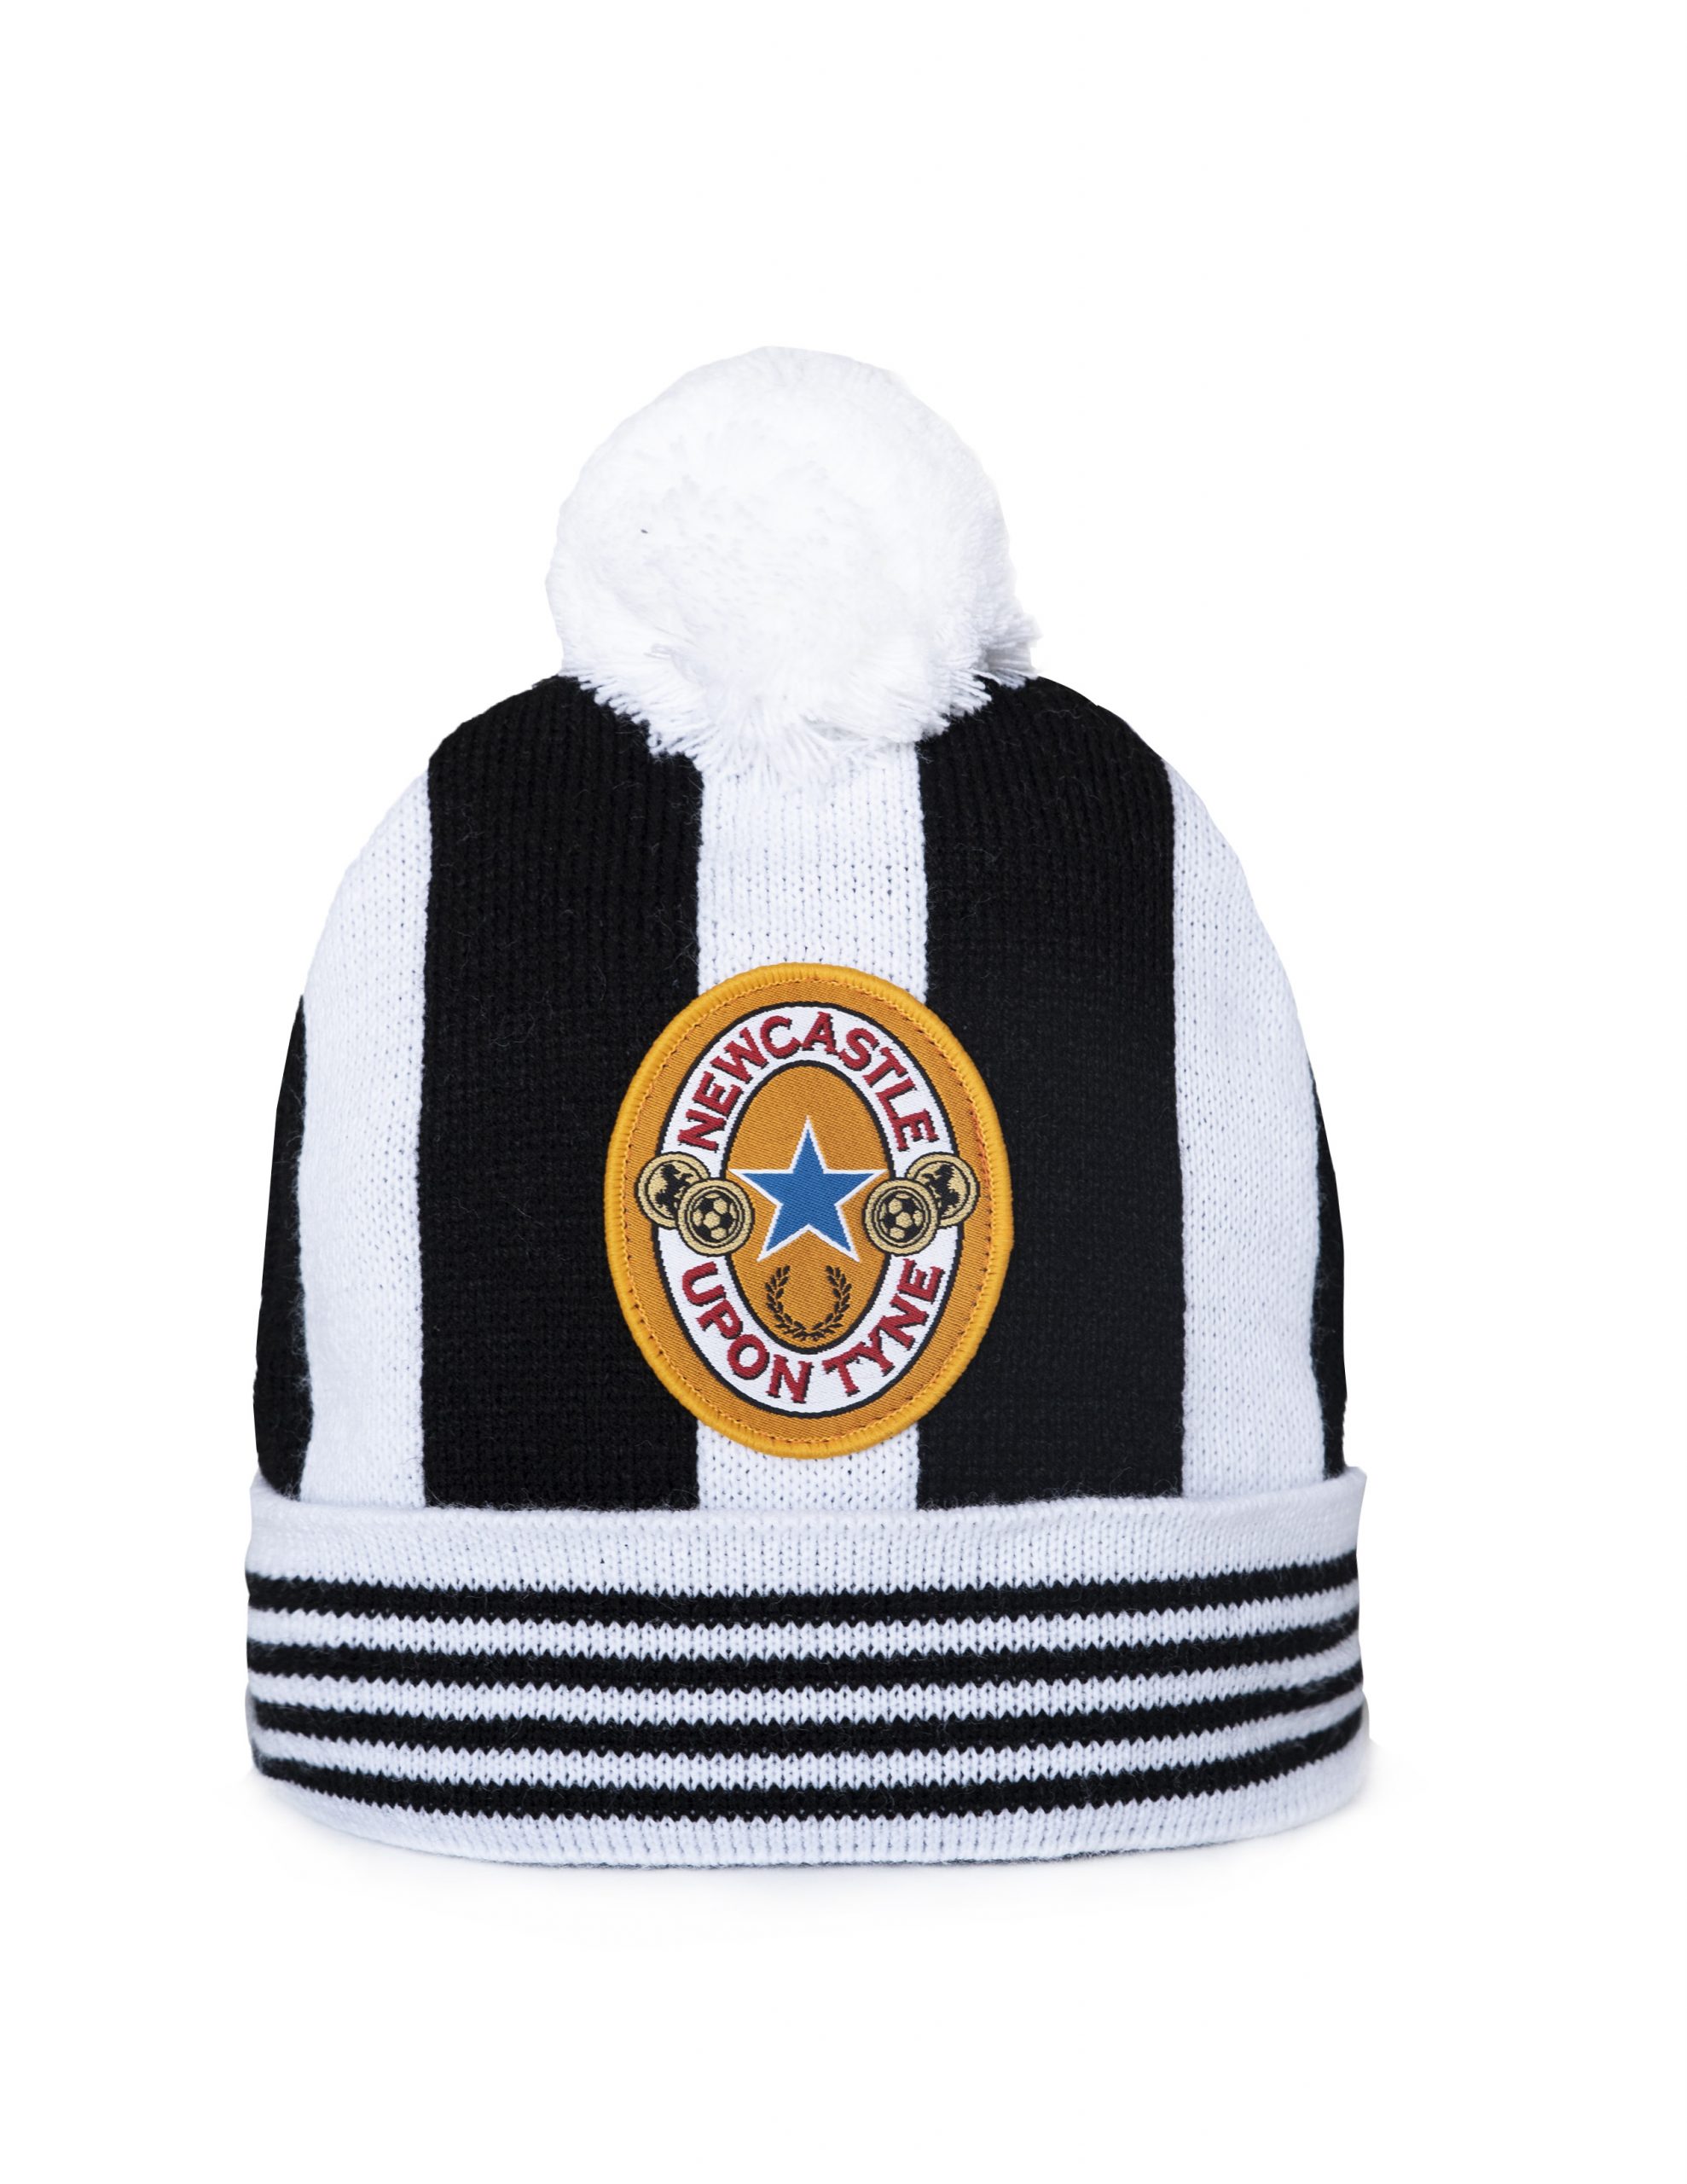 Blue Wooly Hat Sale Shop, 61% OFF | connect-summary.com